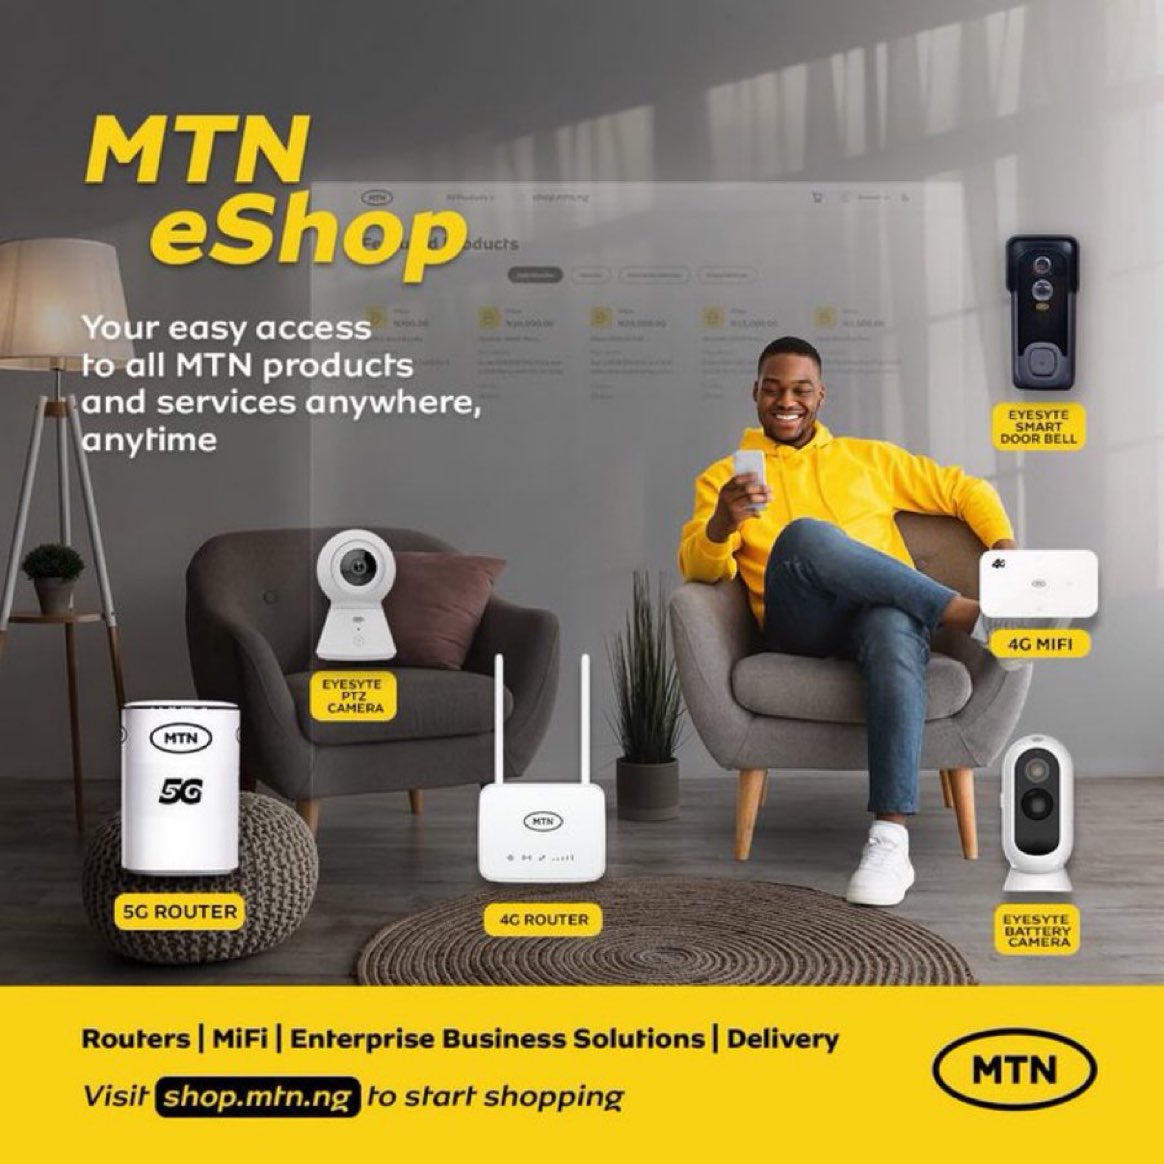 Kingston on X: With MTN, experience the speedy internet of the